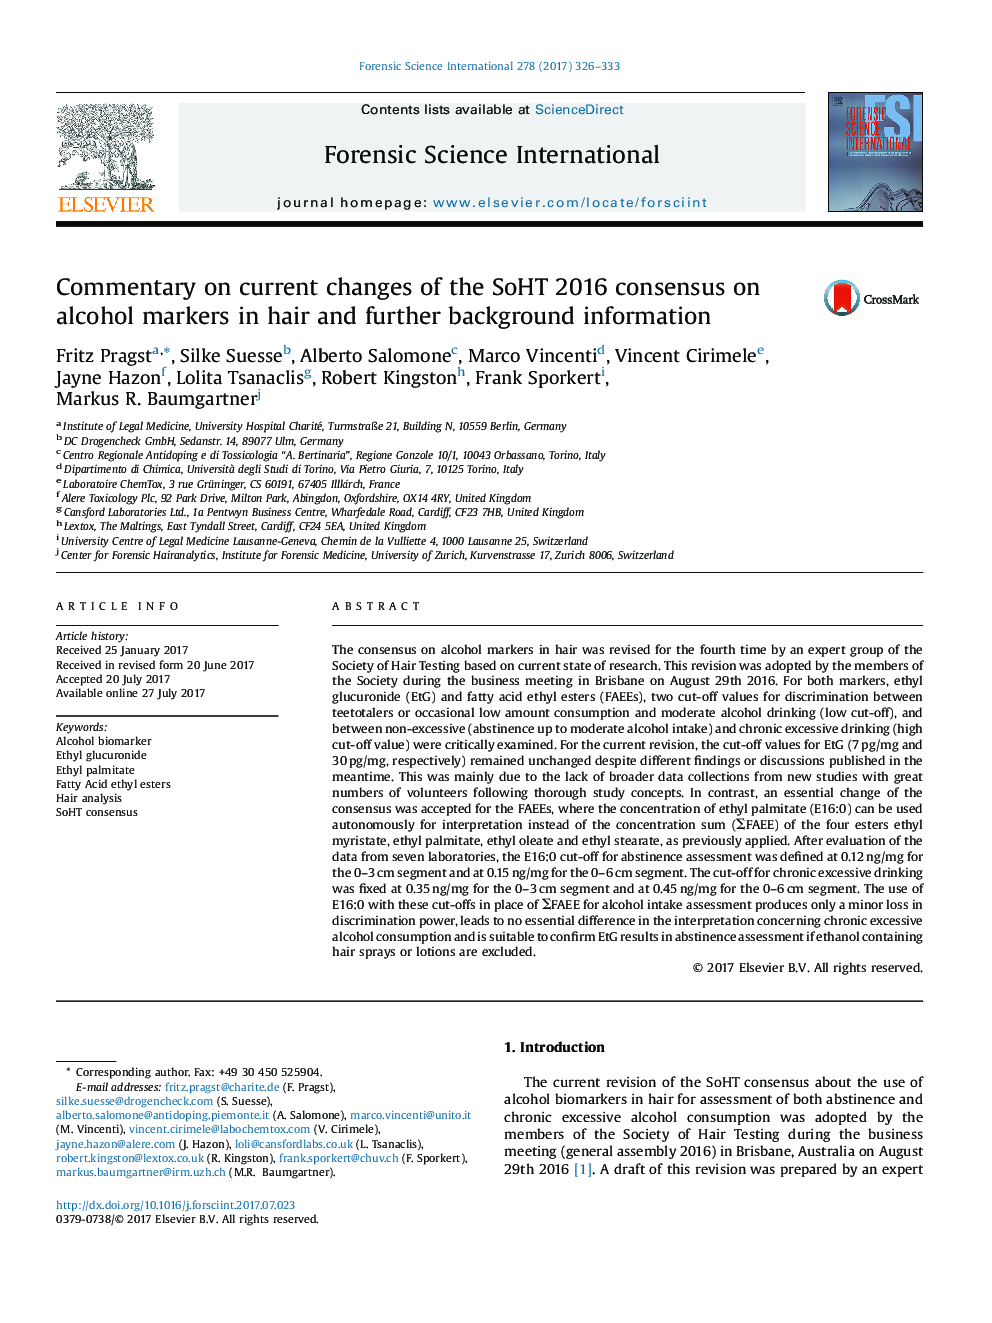 Commentary on current changes of the SoHT 2016 consensus on alcohol markers in hair and further background information